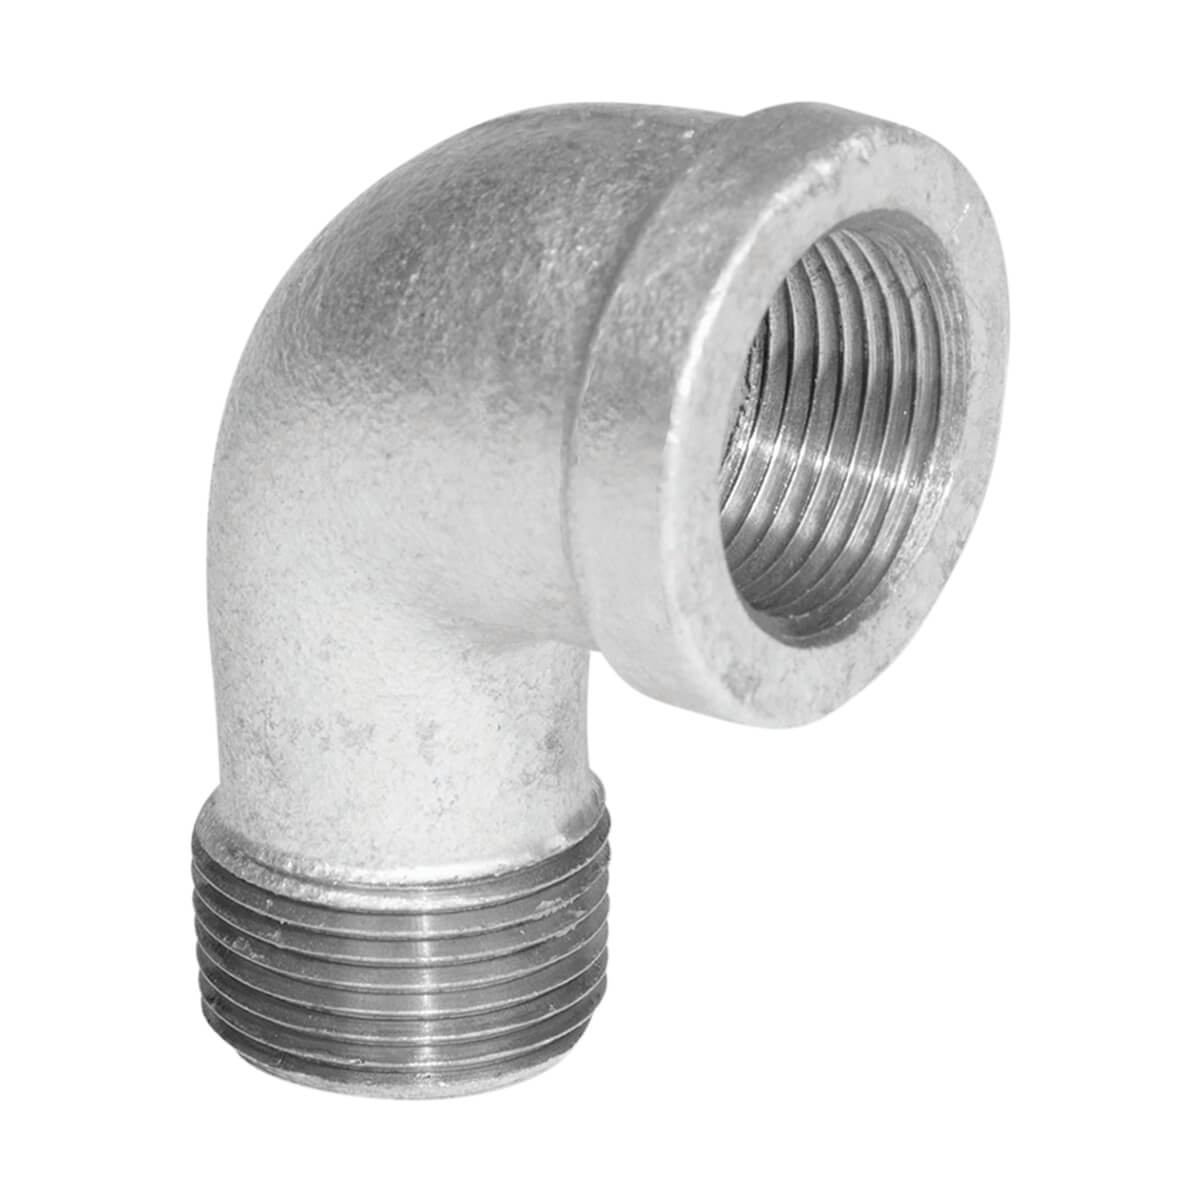 Fitting Galvanized Iron 90 ST Elbow - 2-in